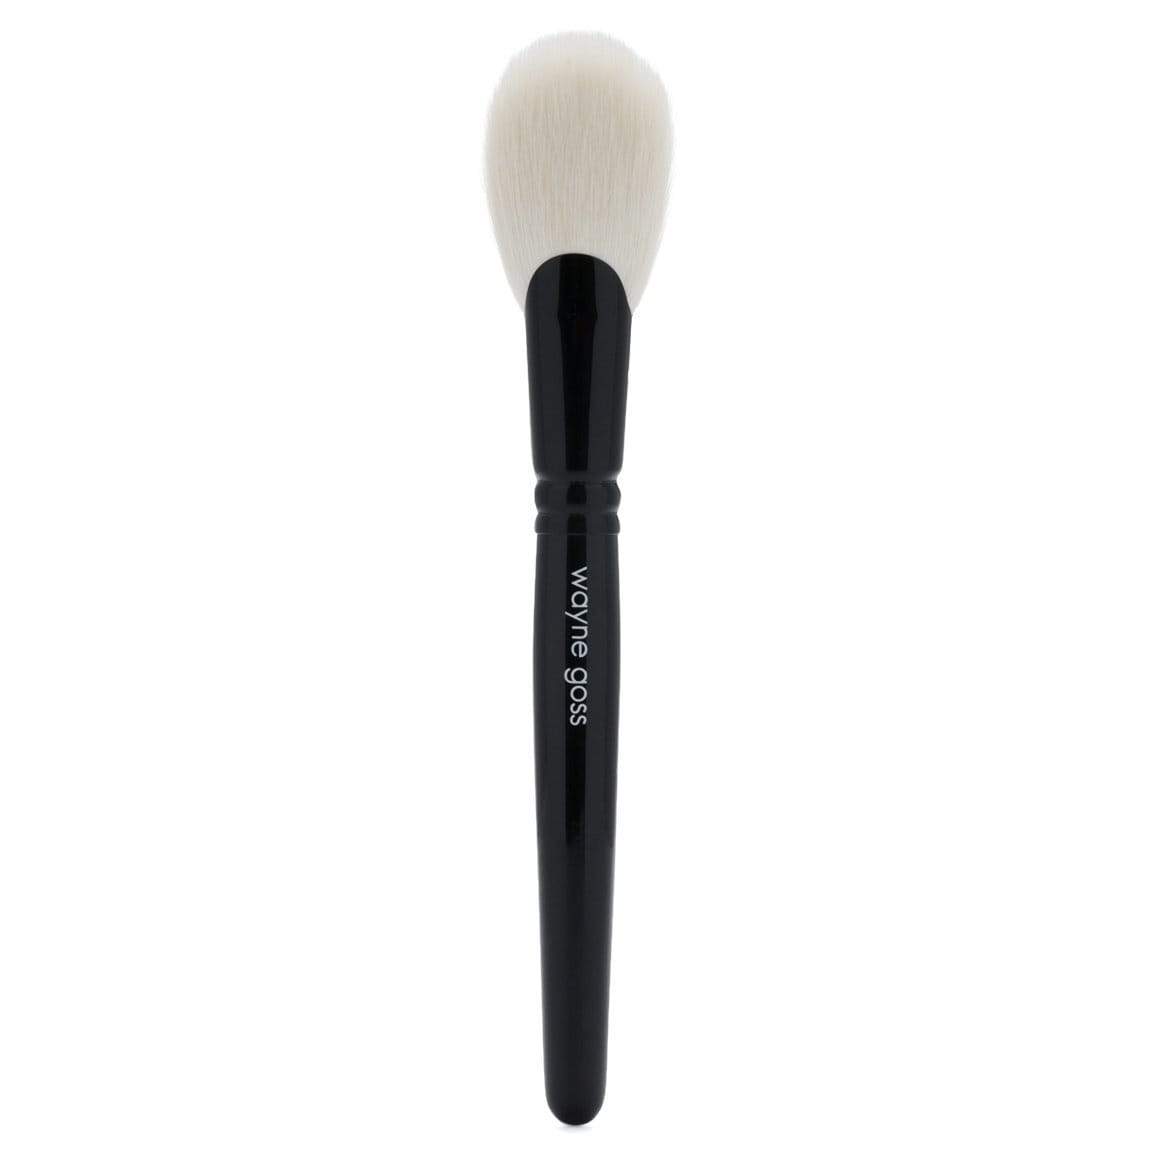 WAYNE GOSS The Holiday Brush 2018 - Limited Edition, Makeup Brushes, London Loves Beauty